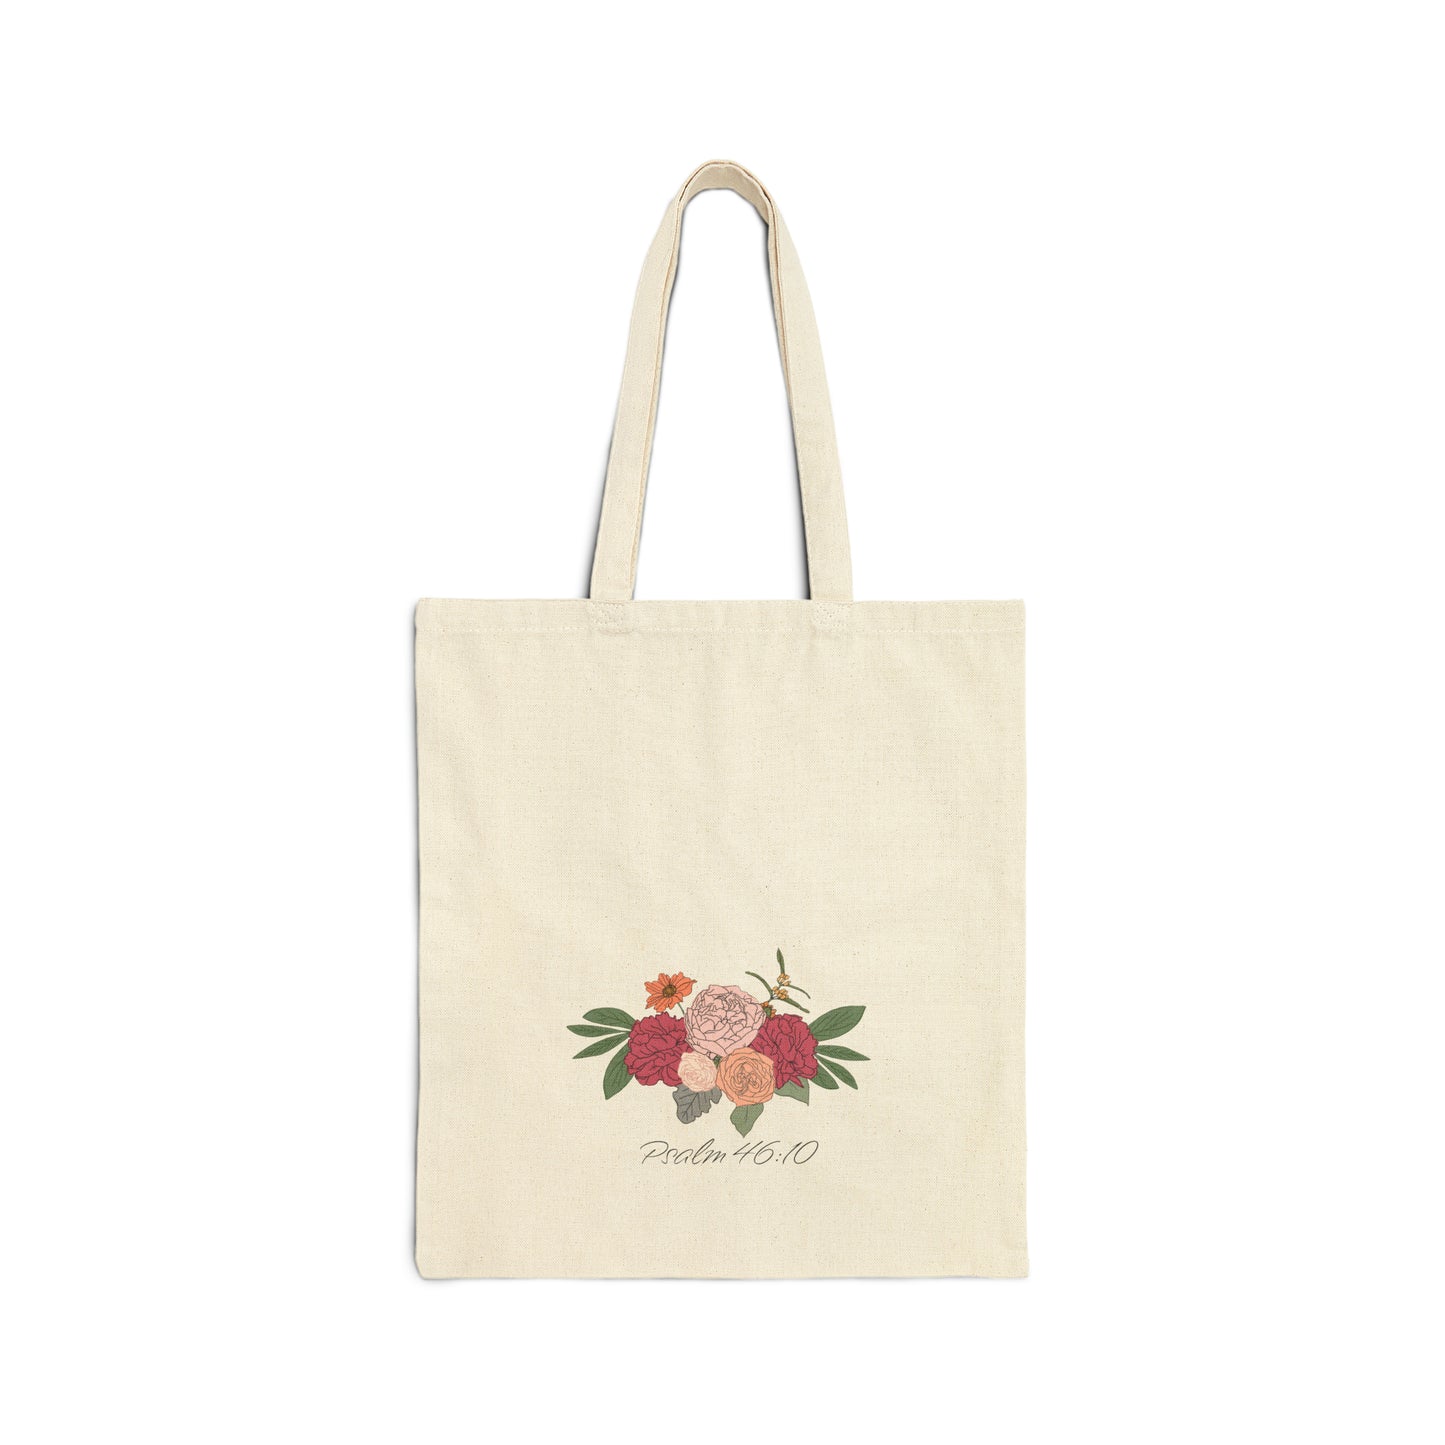 Be Still And Know Tote Bag